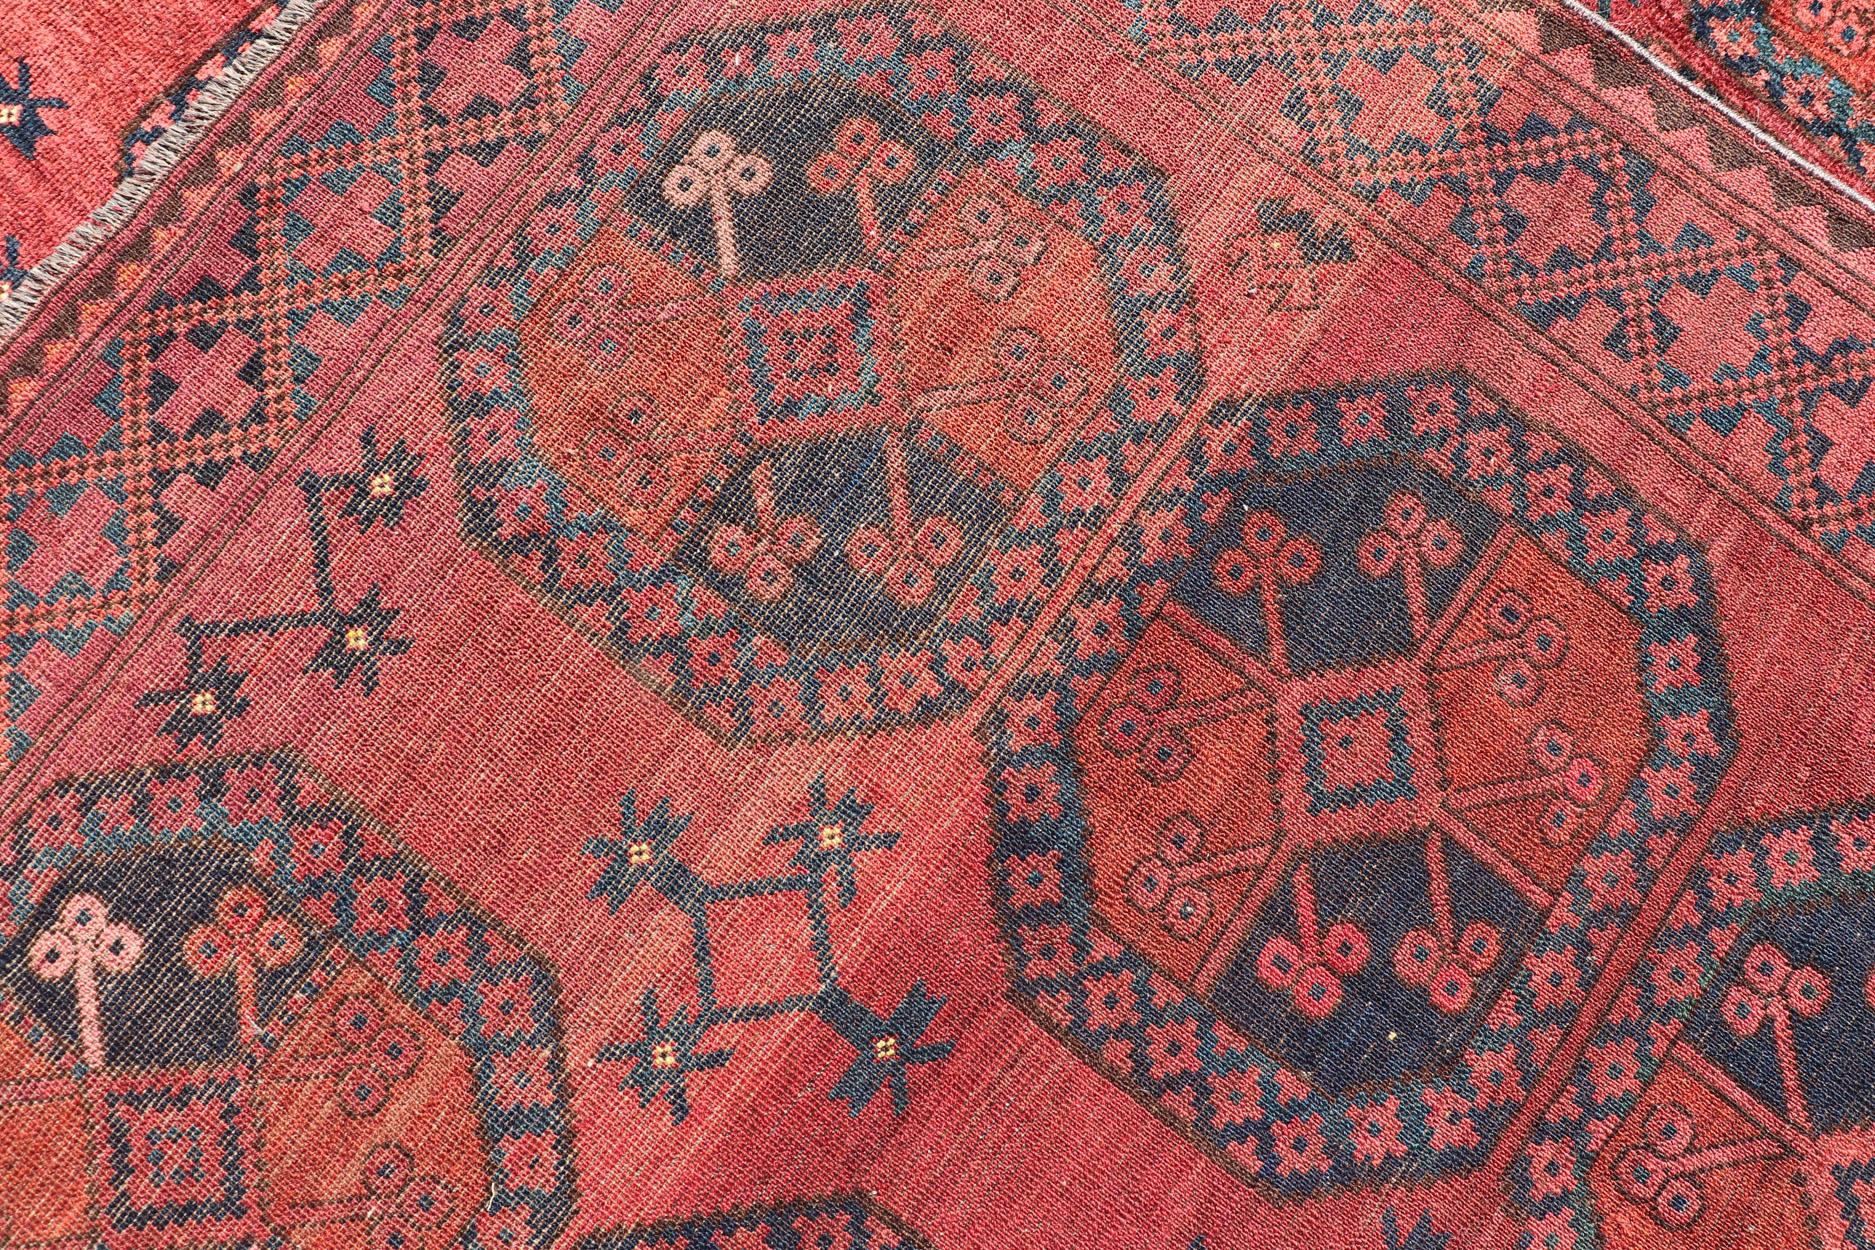 Hand-Knotted Turkomen Ersari Rug in Wool with Gul Design in Red, Orange and Blue For Sale 10